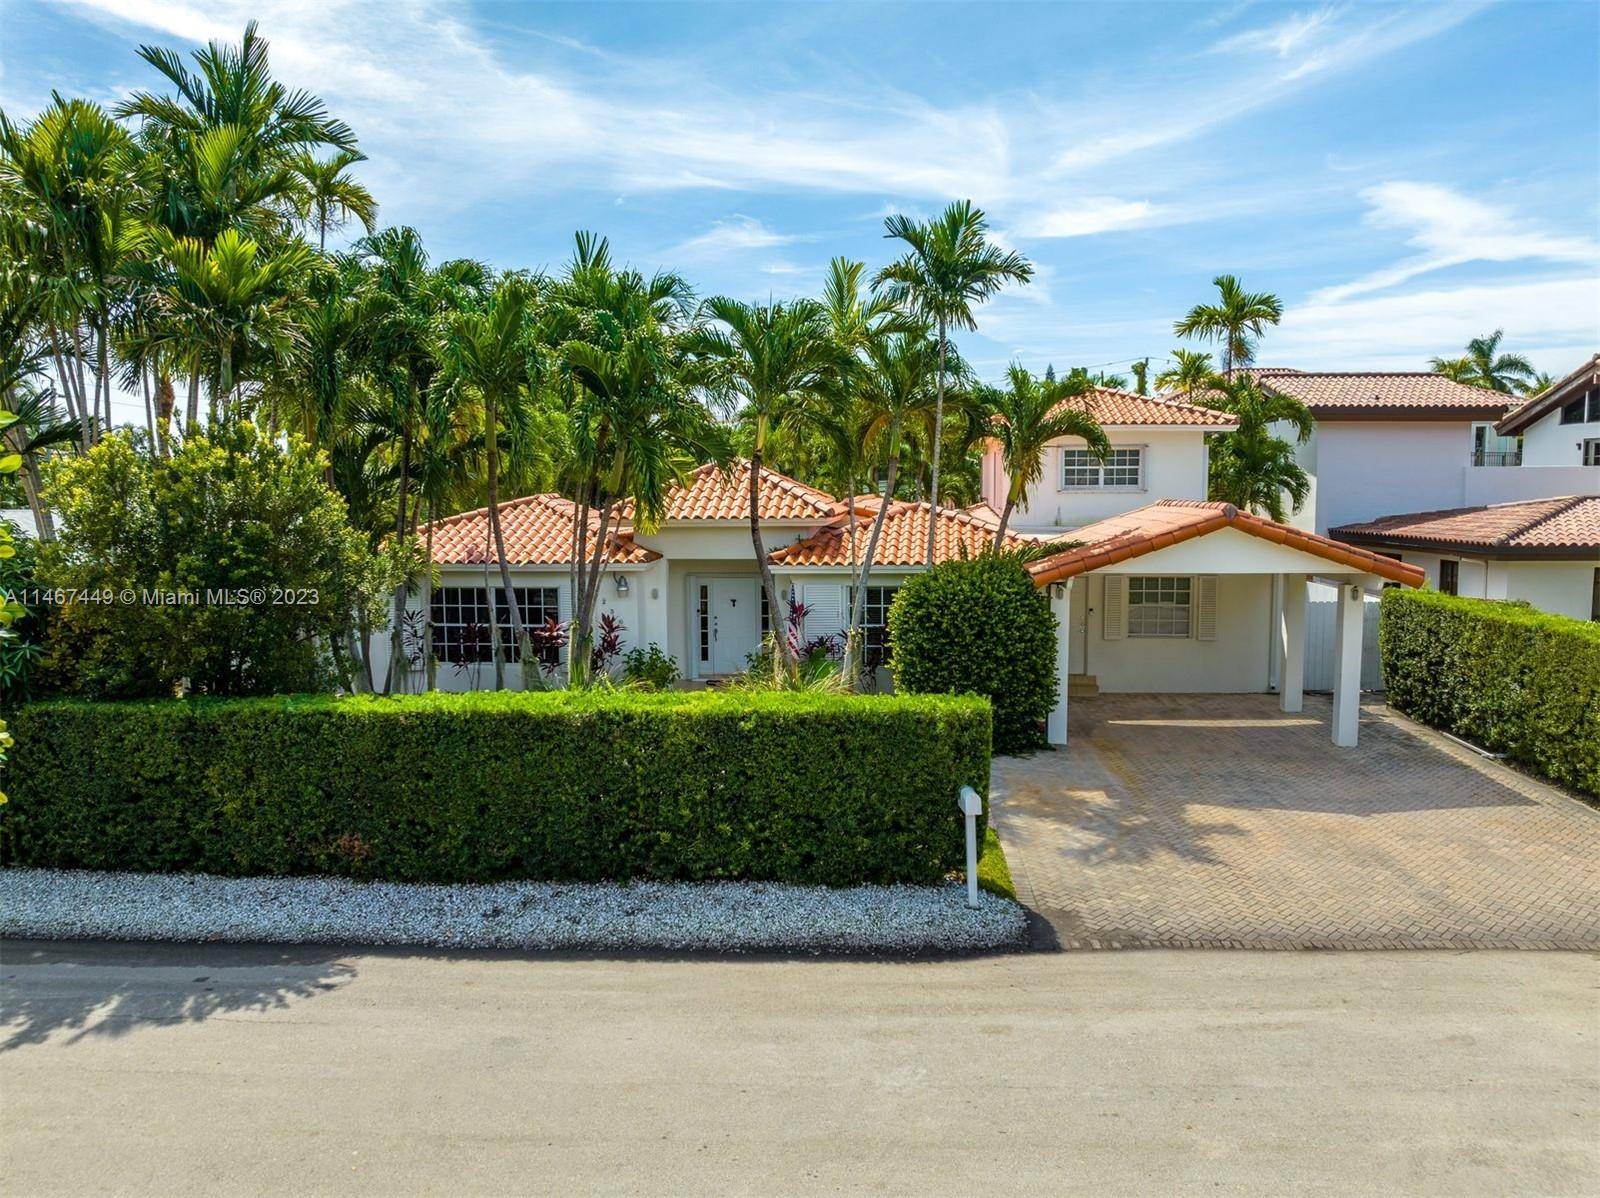 Nestled in the serene and exclusive community of Key Biscayne, this delightful and very charming two story home is located on a secluded and quiet street, offering the perfect backdrop ...